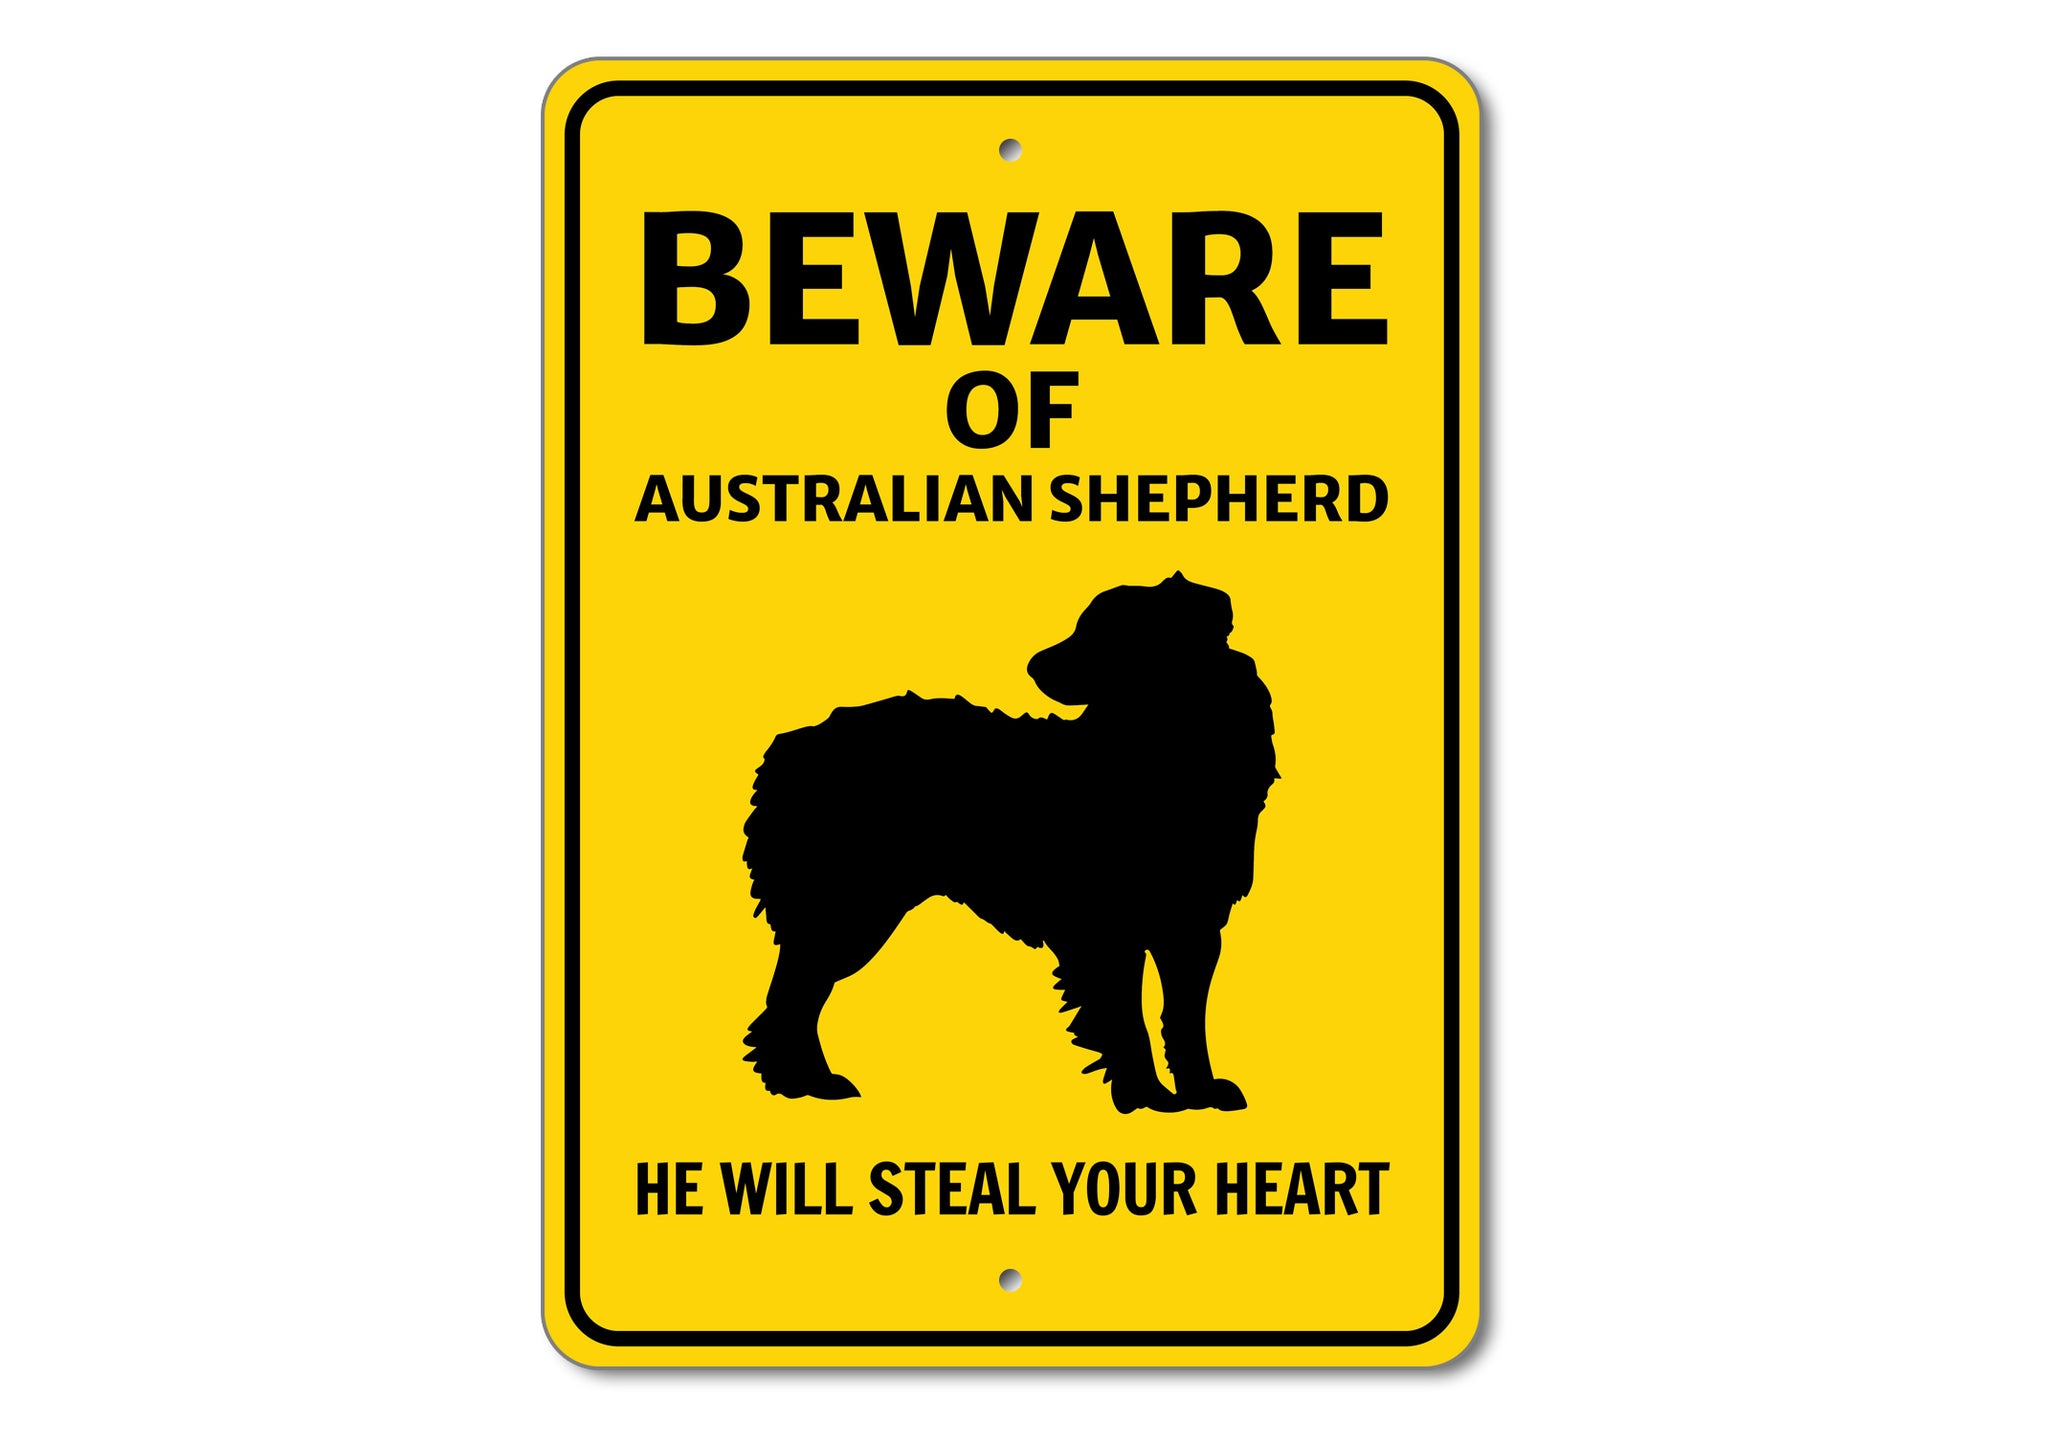 Beware He Will Steal Your Heart K9 Sign - Dog Names Starting with "A"